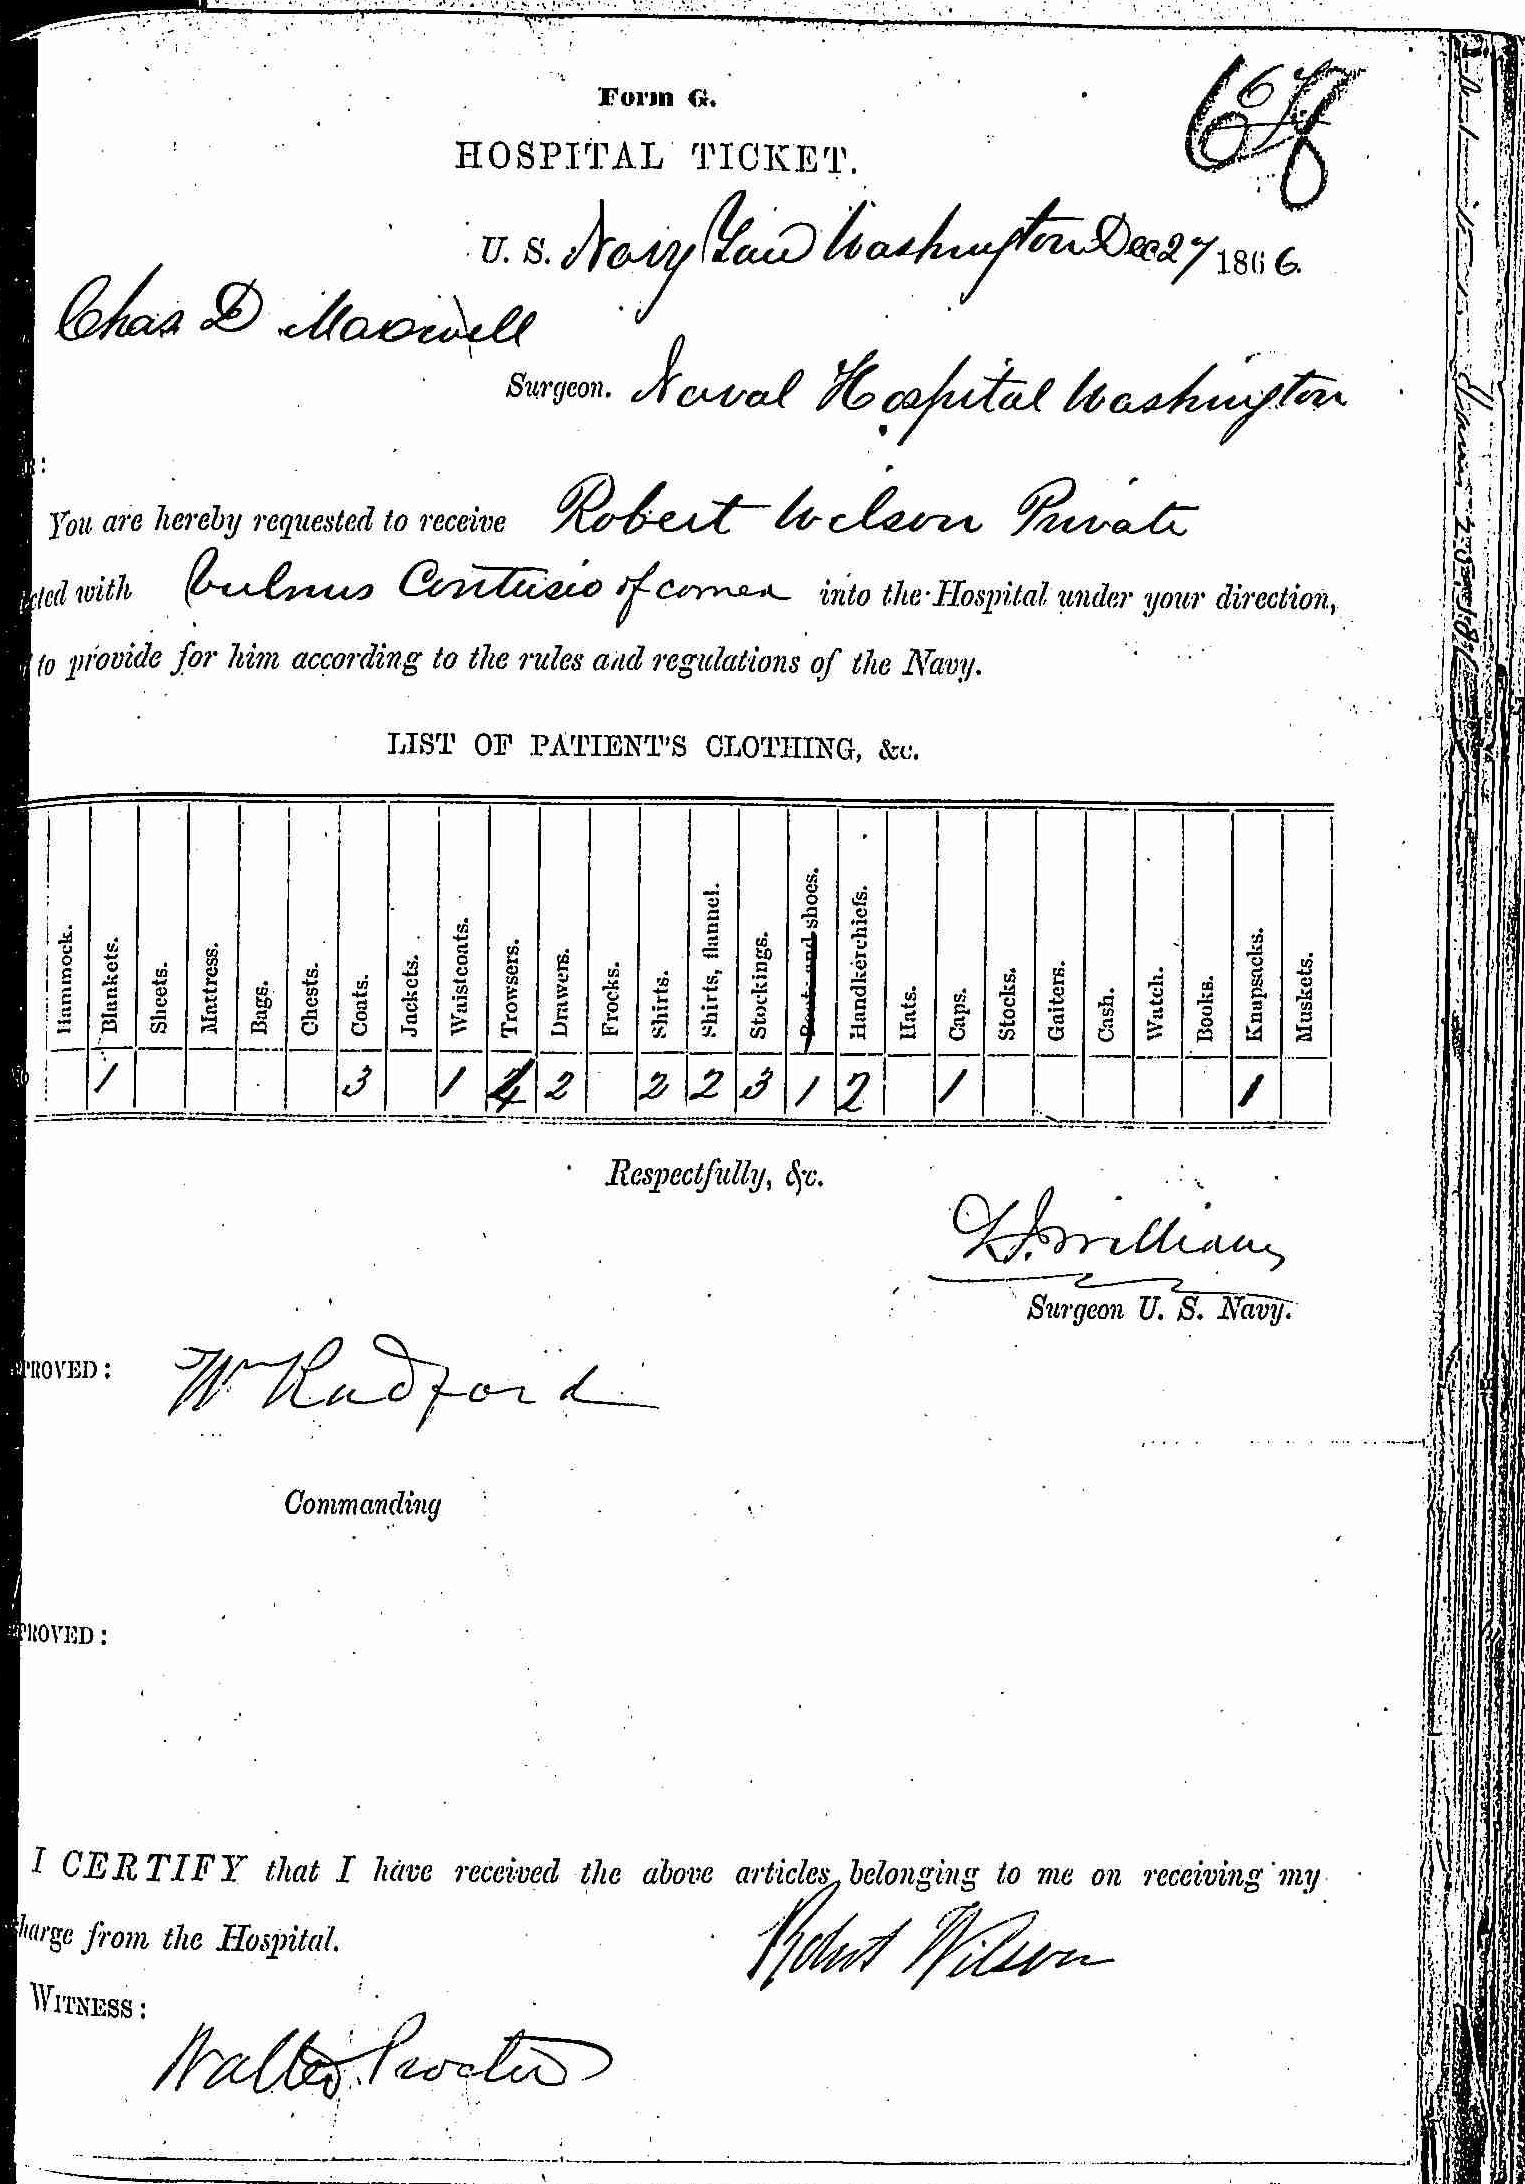 Entry for Robert Wilson (page 1 of 2) in the log Hospital Tickets and Case Papers - Naval Hospital - Washington, D.C. - 1865-68